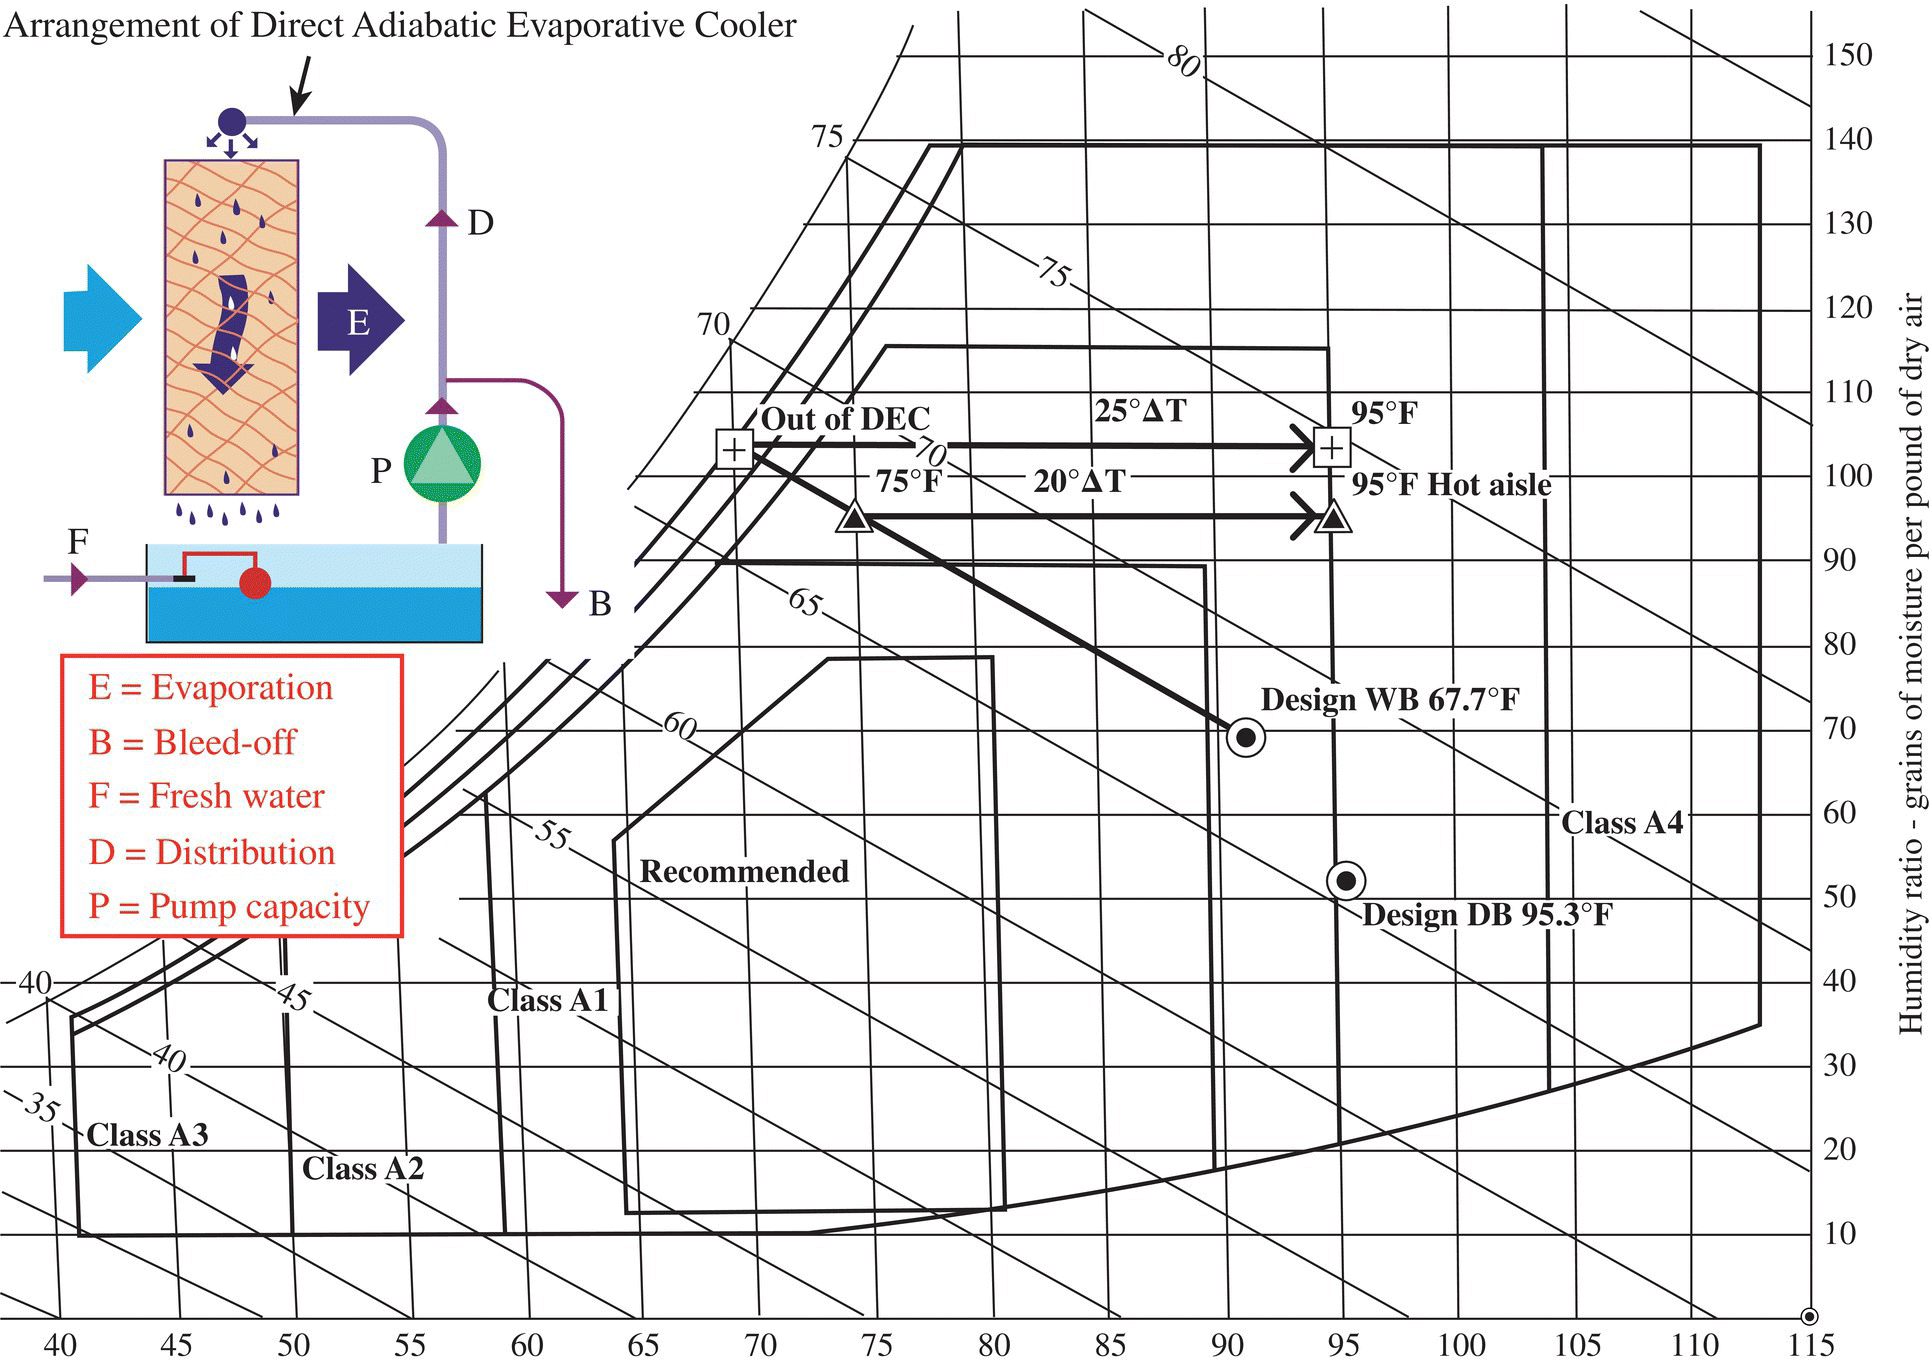 Schematic illustration of direct cooling processes shown with ASHRAE recommended and allowable envelopes for DC supply temperature and moisture levels.